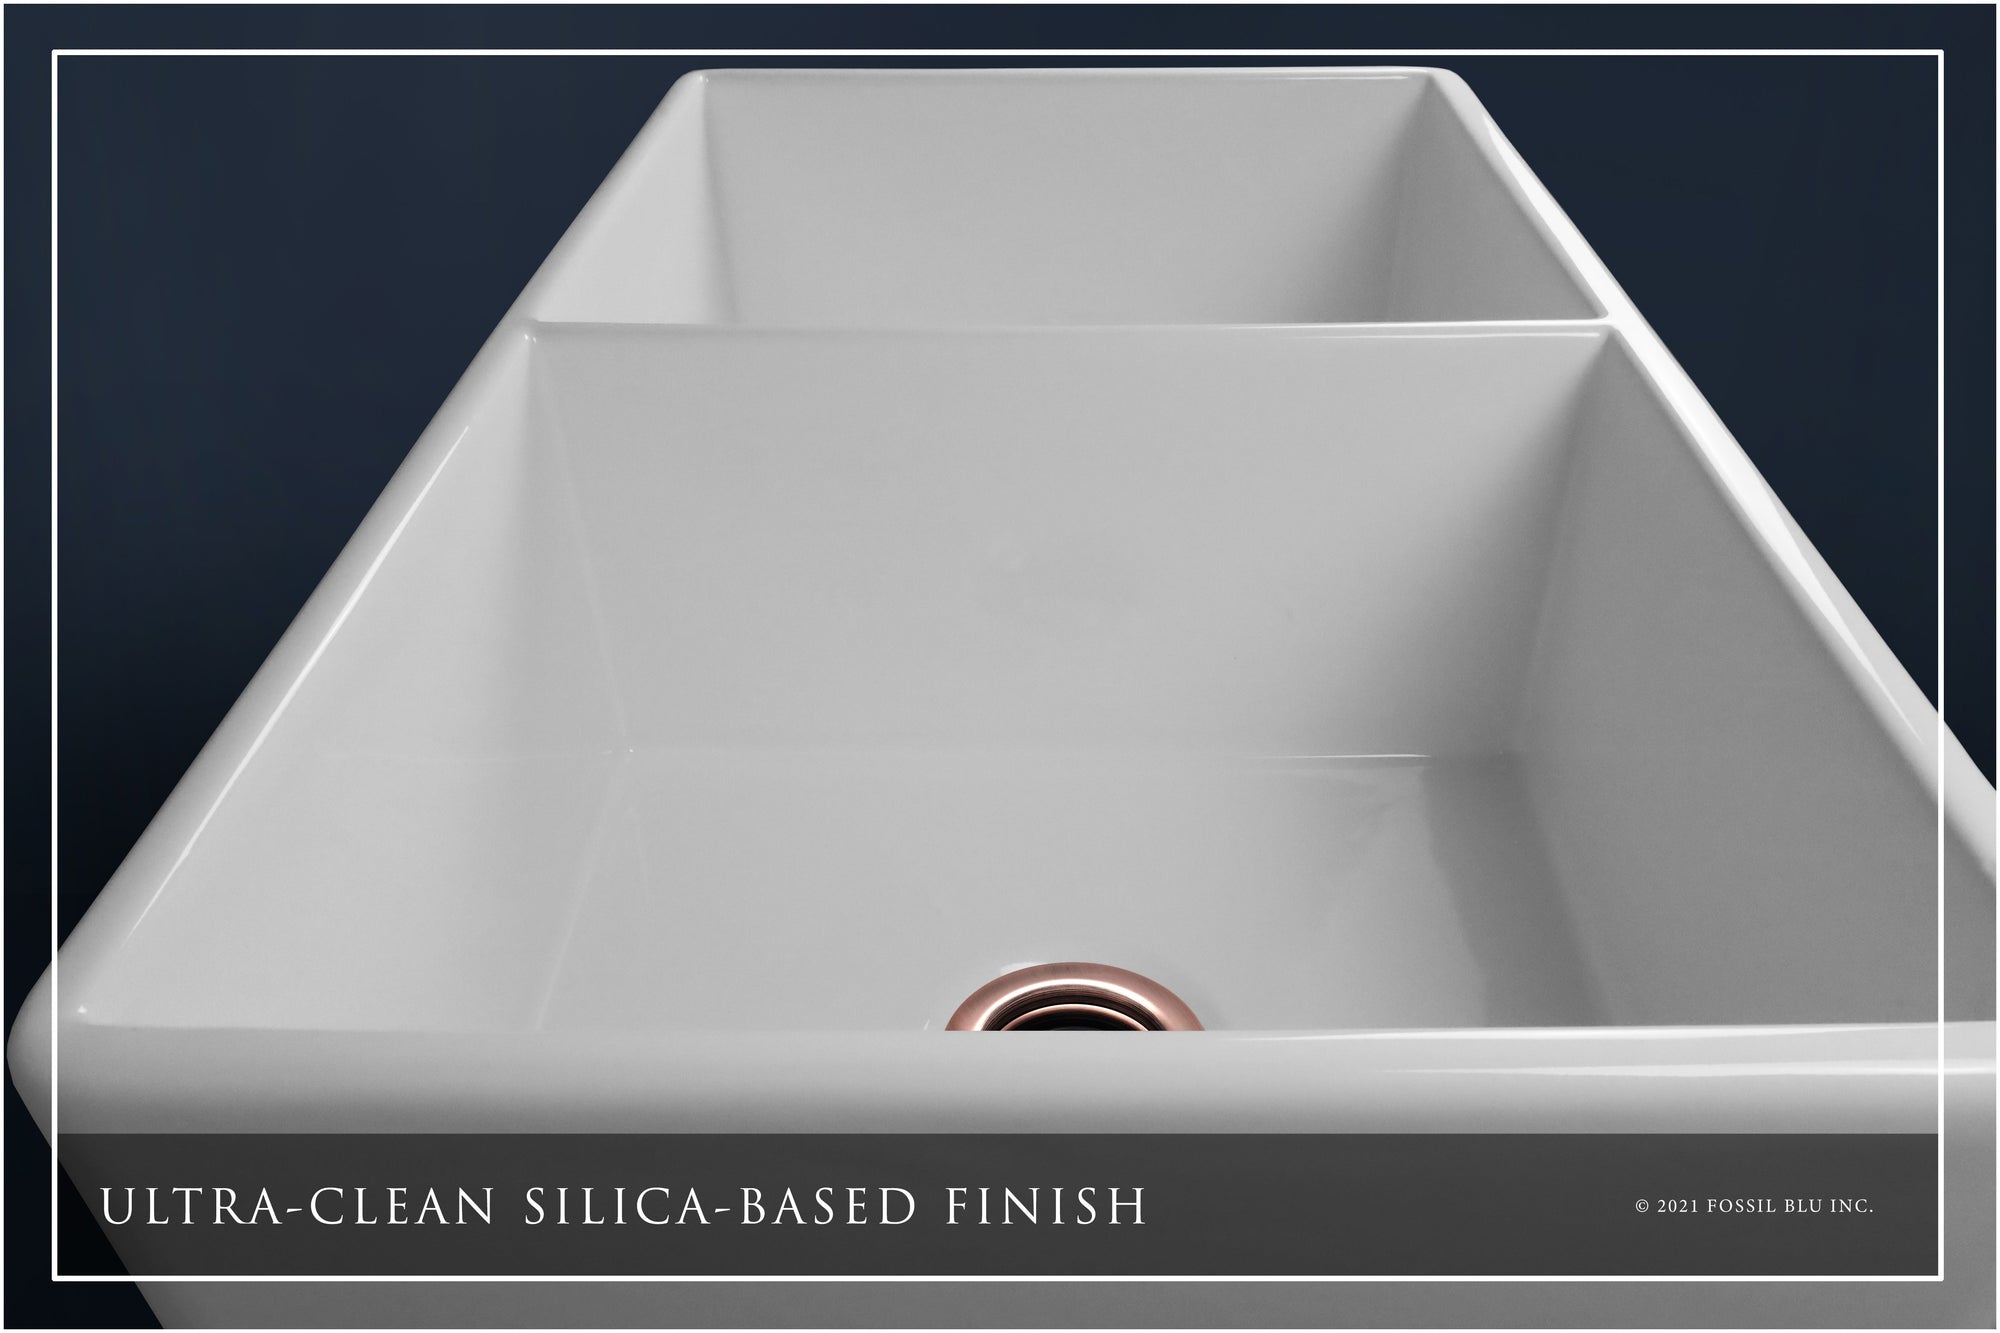 FSW1012AC LUXURY 33-INCH SOLID FIRECLAY FARMHOUSE SINK IN WHITE, ANTIQUE COPPER ACCS, BELTED FRONT